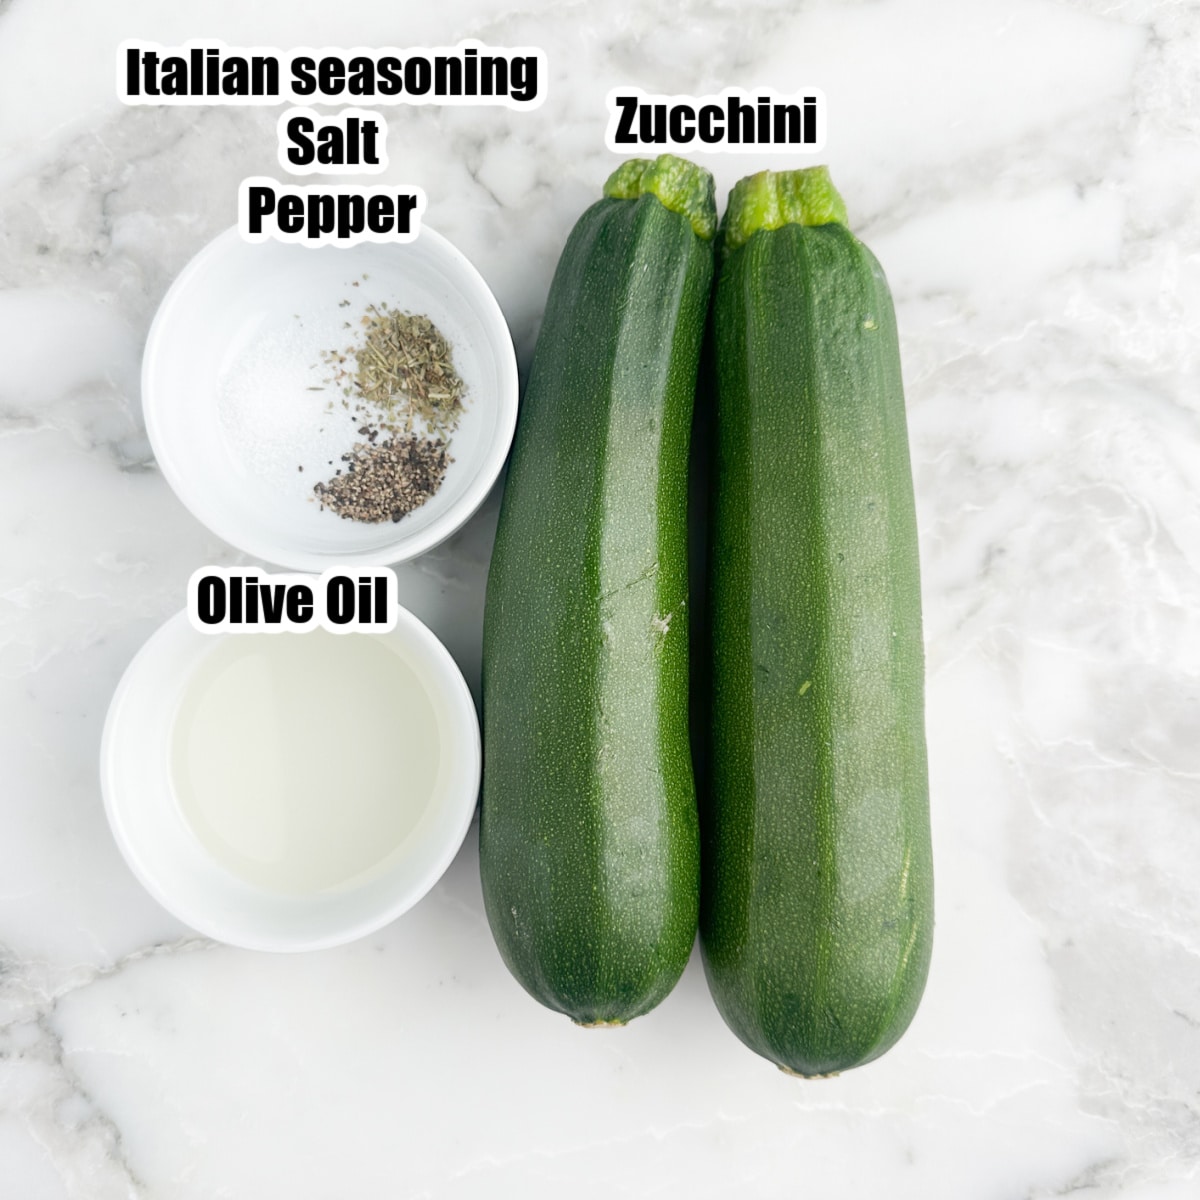 2 zucchinis, bowl of olive oil and seasonings. 